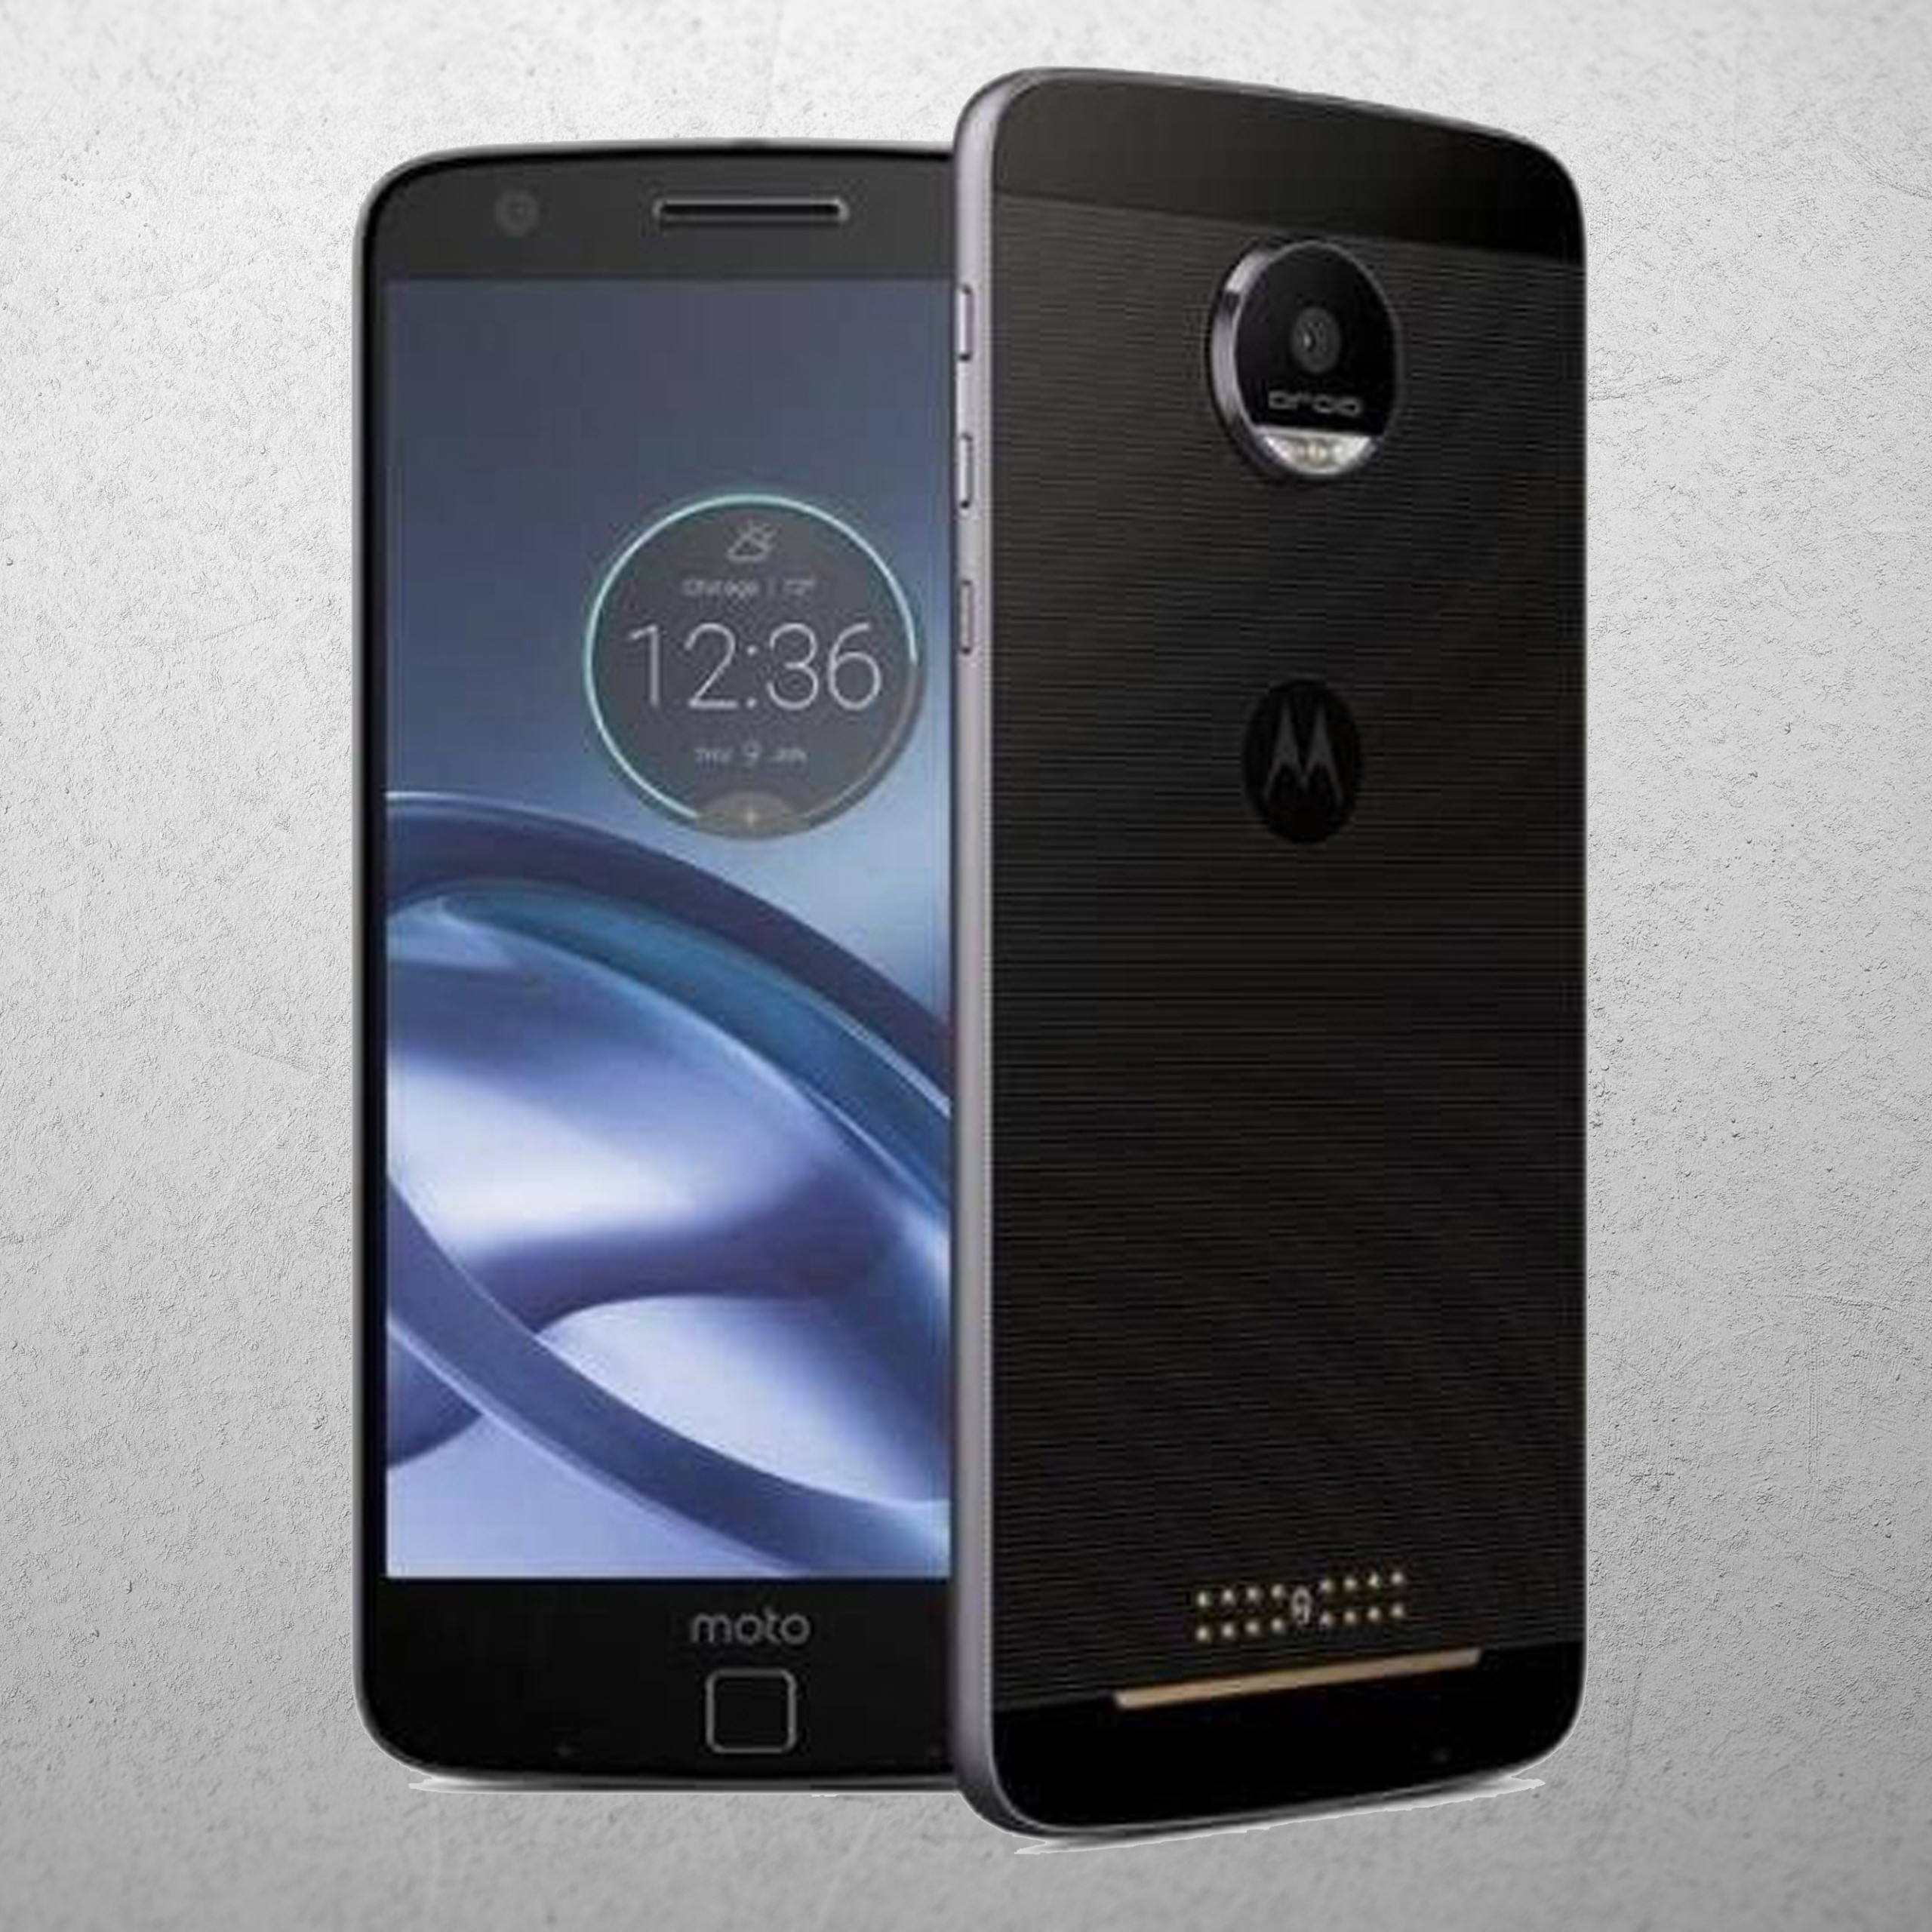 One Hour Device Repair offers repair services for the Motorola Moto Z2 Force, with pricing and availability information included in this review.